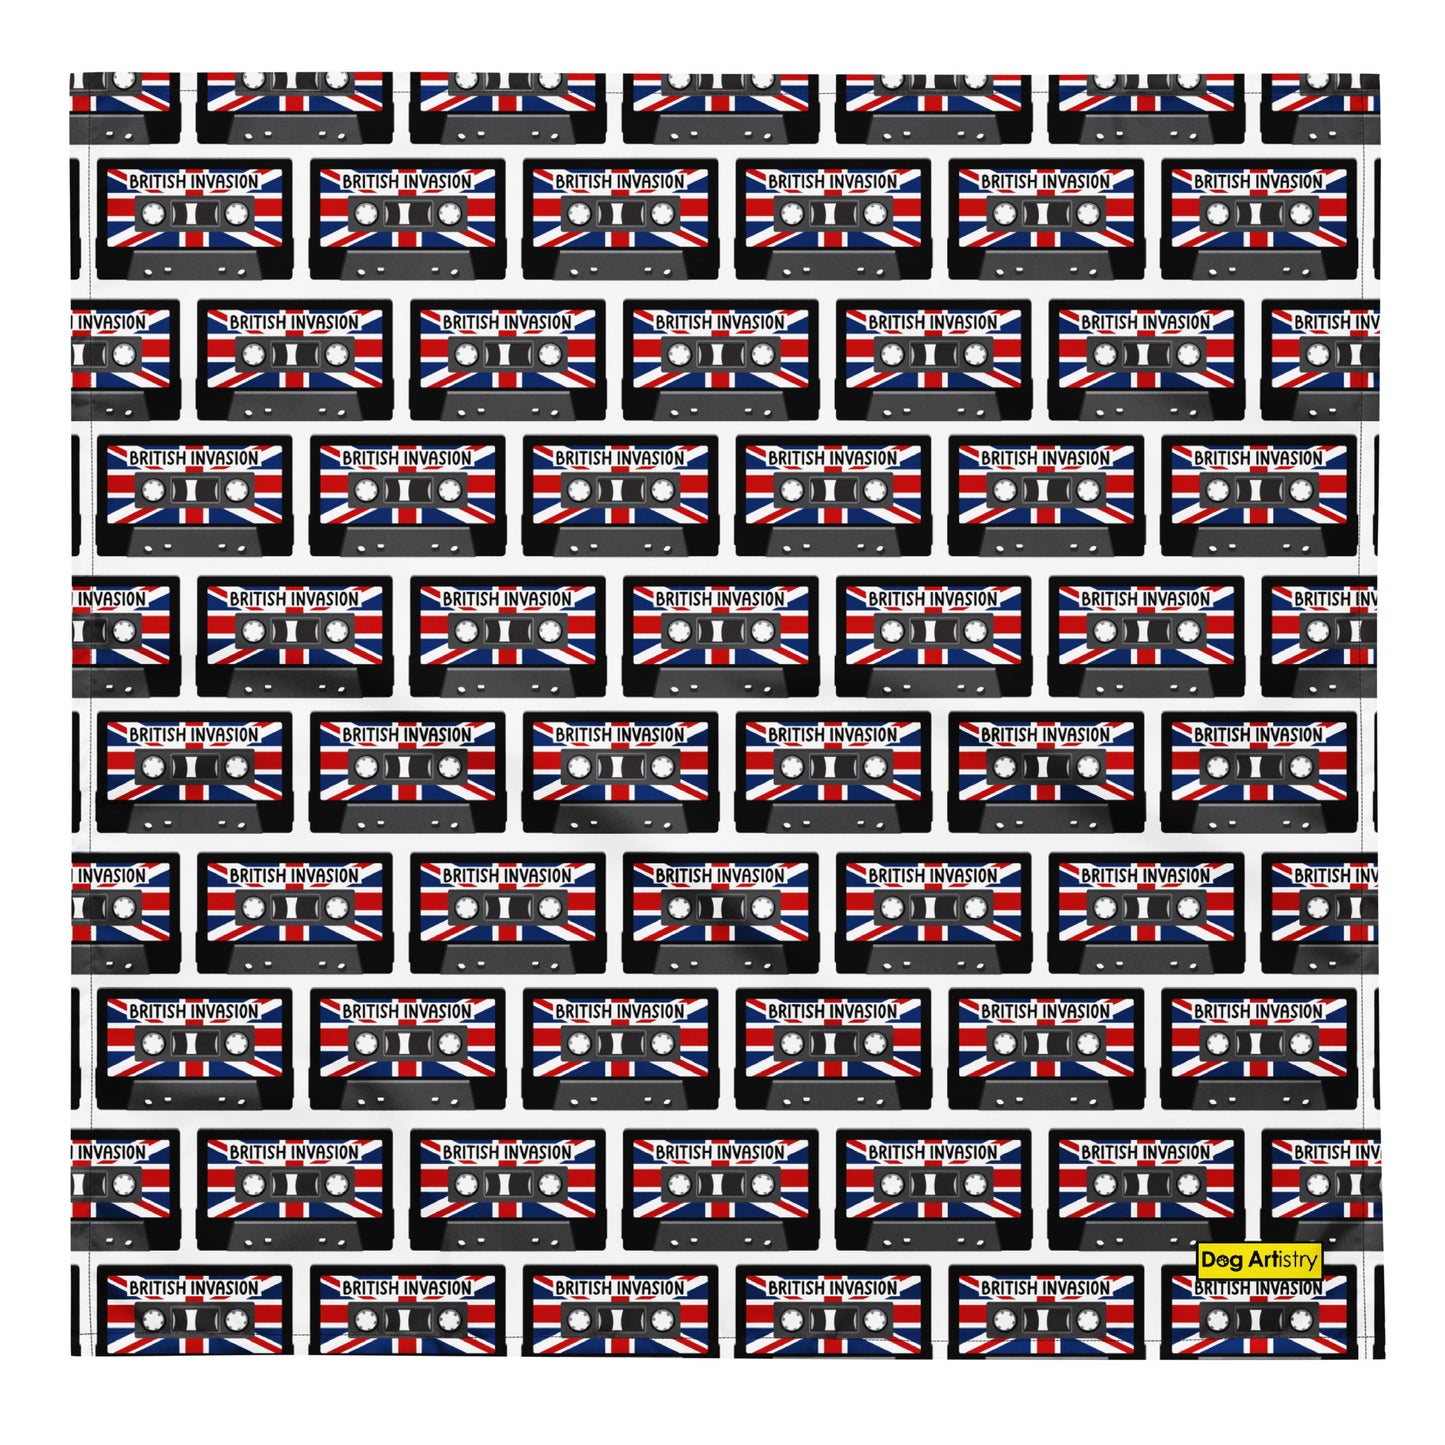 British Invasion Cassette Tapes with Union Jack Flag All-over print bandana